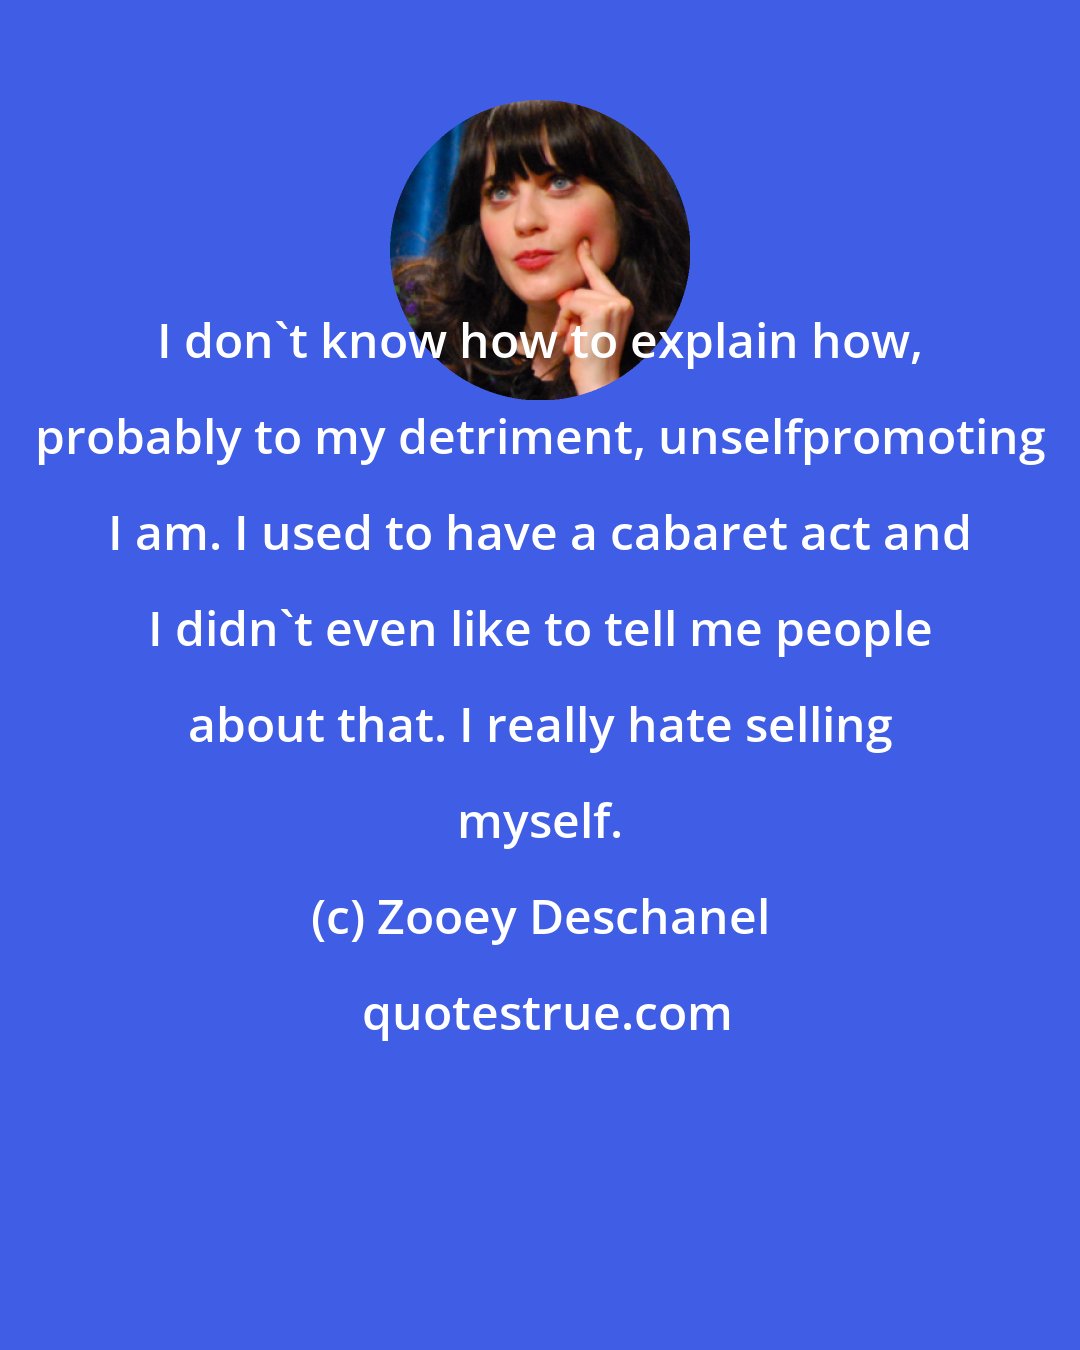 Zooey Deschanel: I don't know how to explain how, probably to my detriment, unselfpromoting I am. I used to have a cabaret act and I didn't even like to tell me people about that. I really hate selling myself.